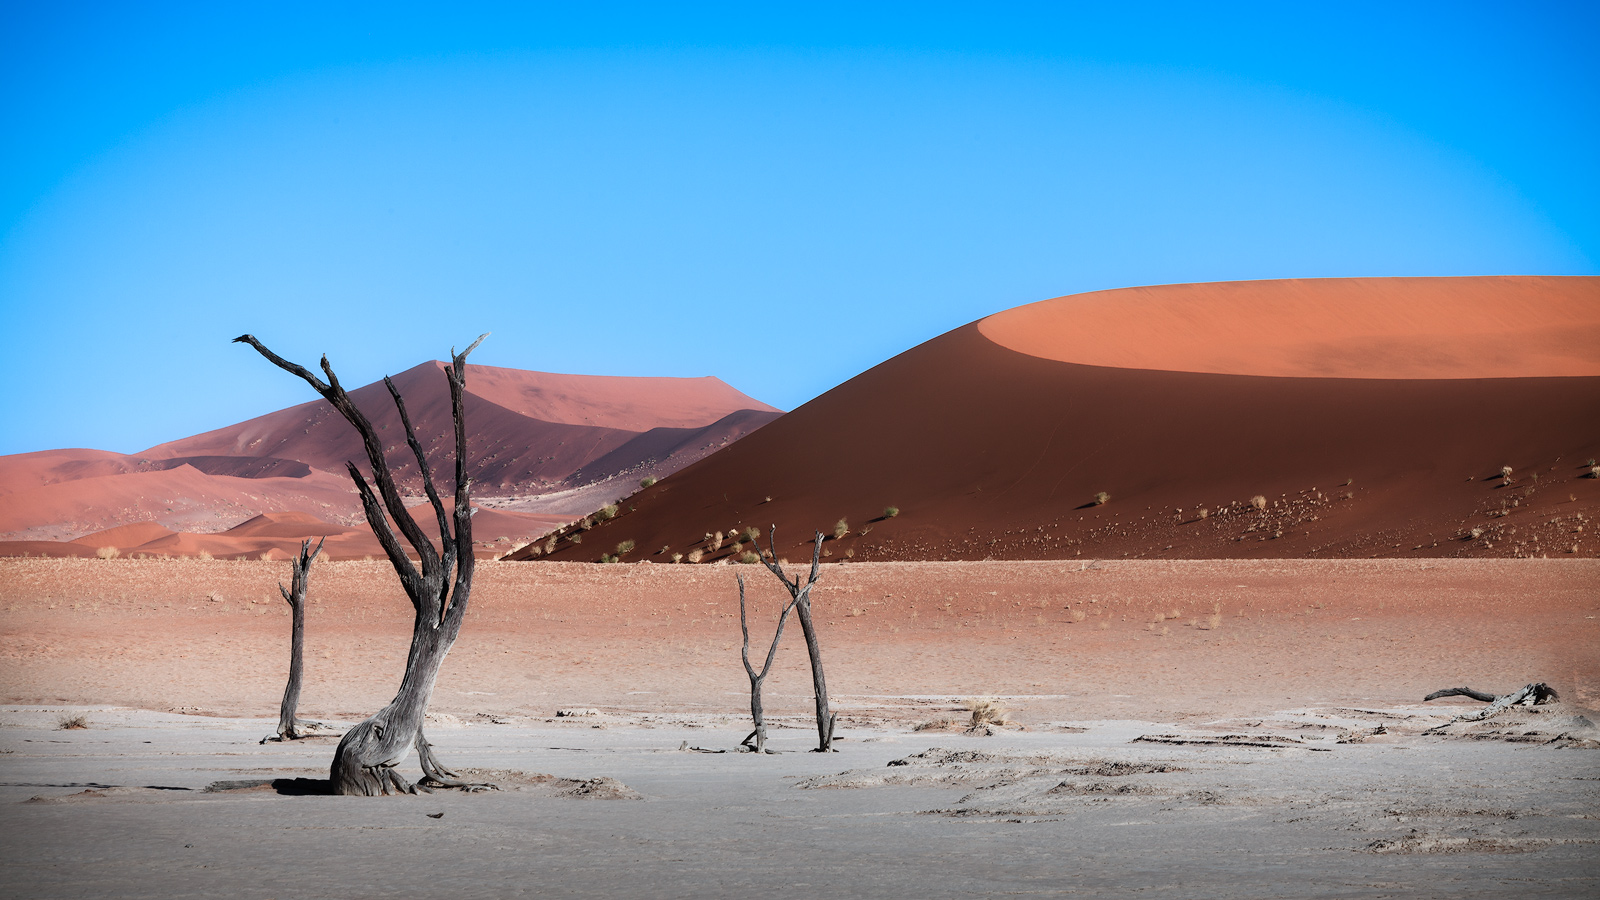 Trees near the entrance of Deadvlei with orange dunes in the background